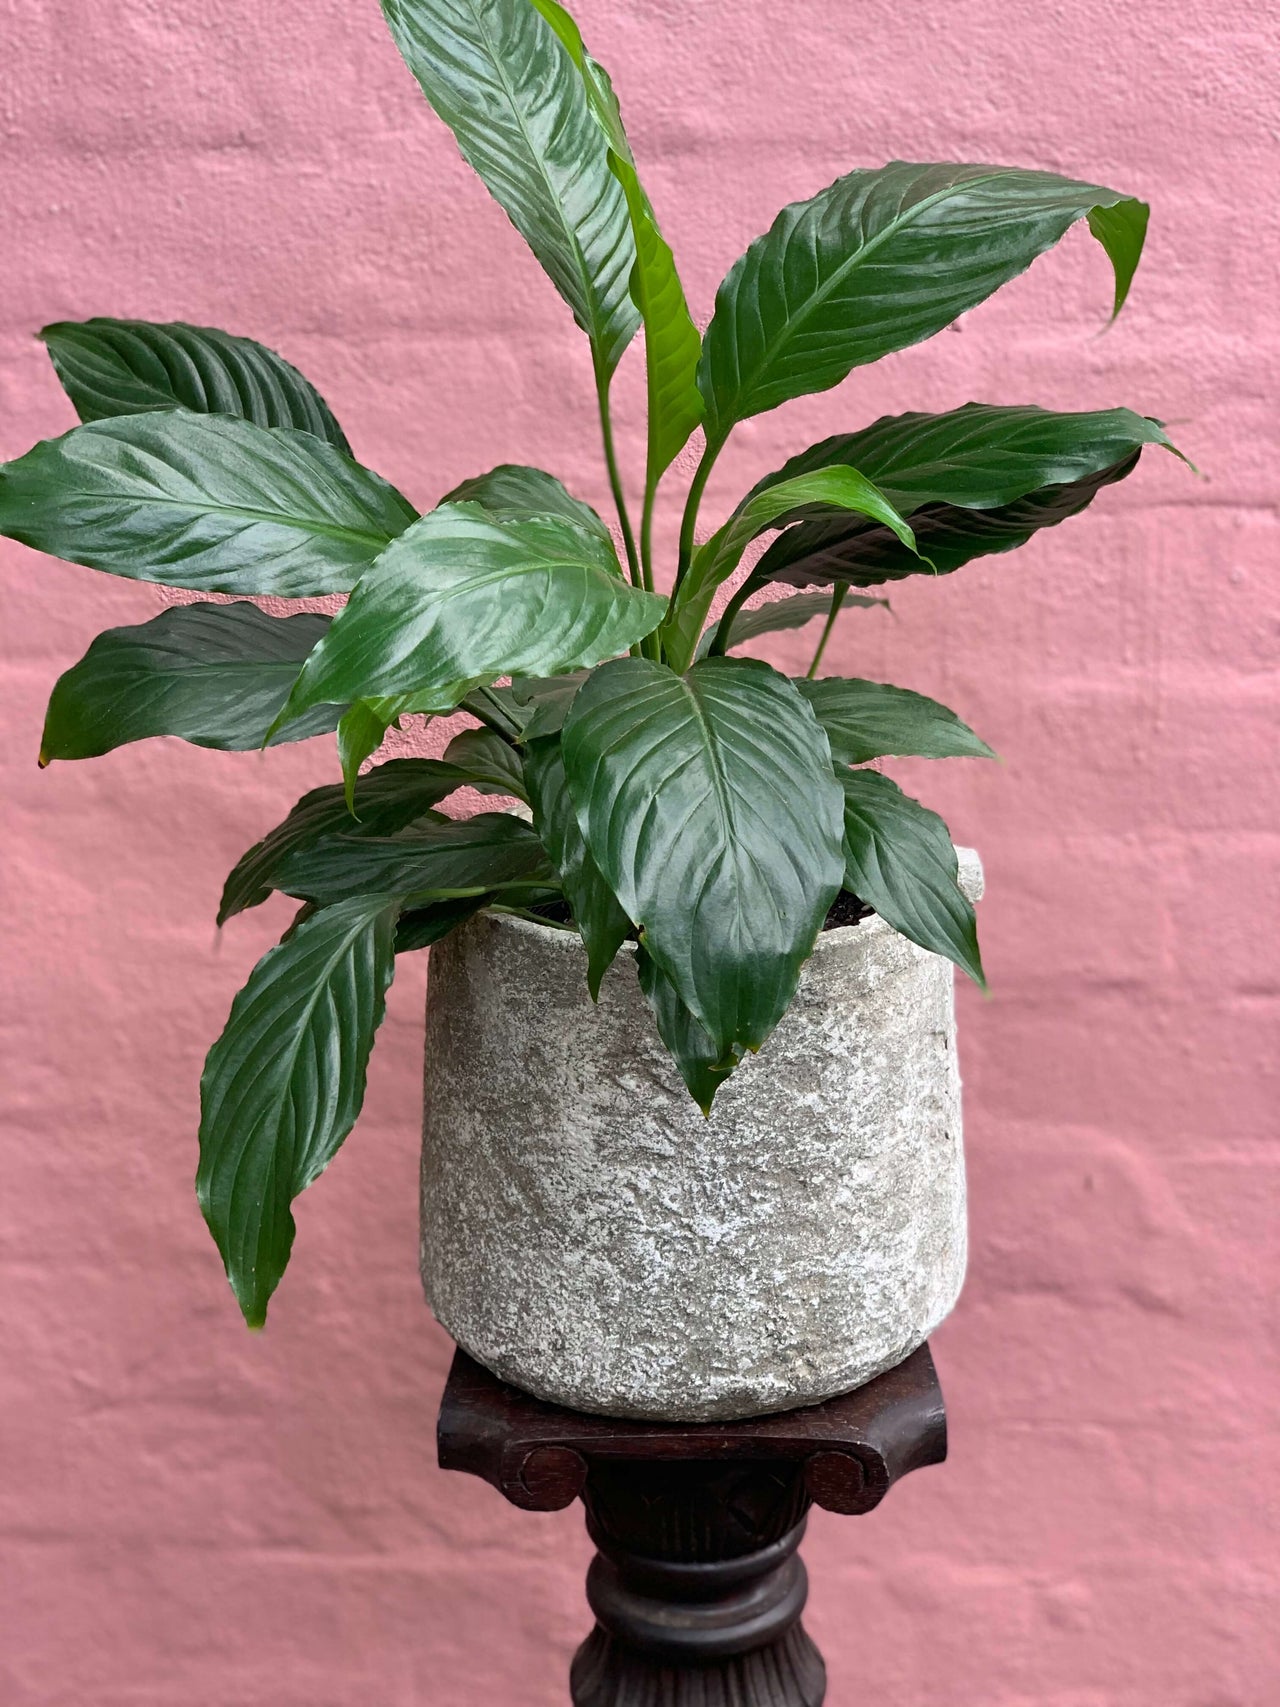 Spathiphyllum 'Peace Lilly' - Haven Botanical